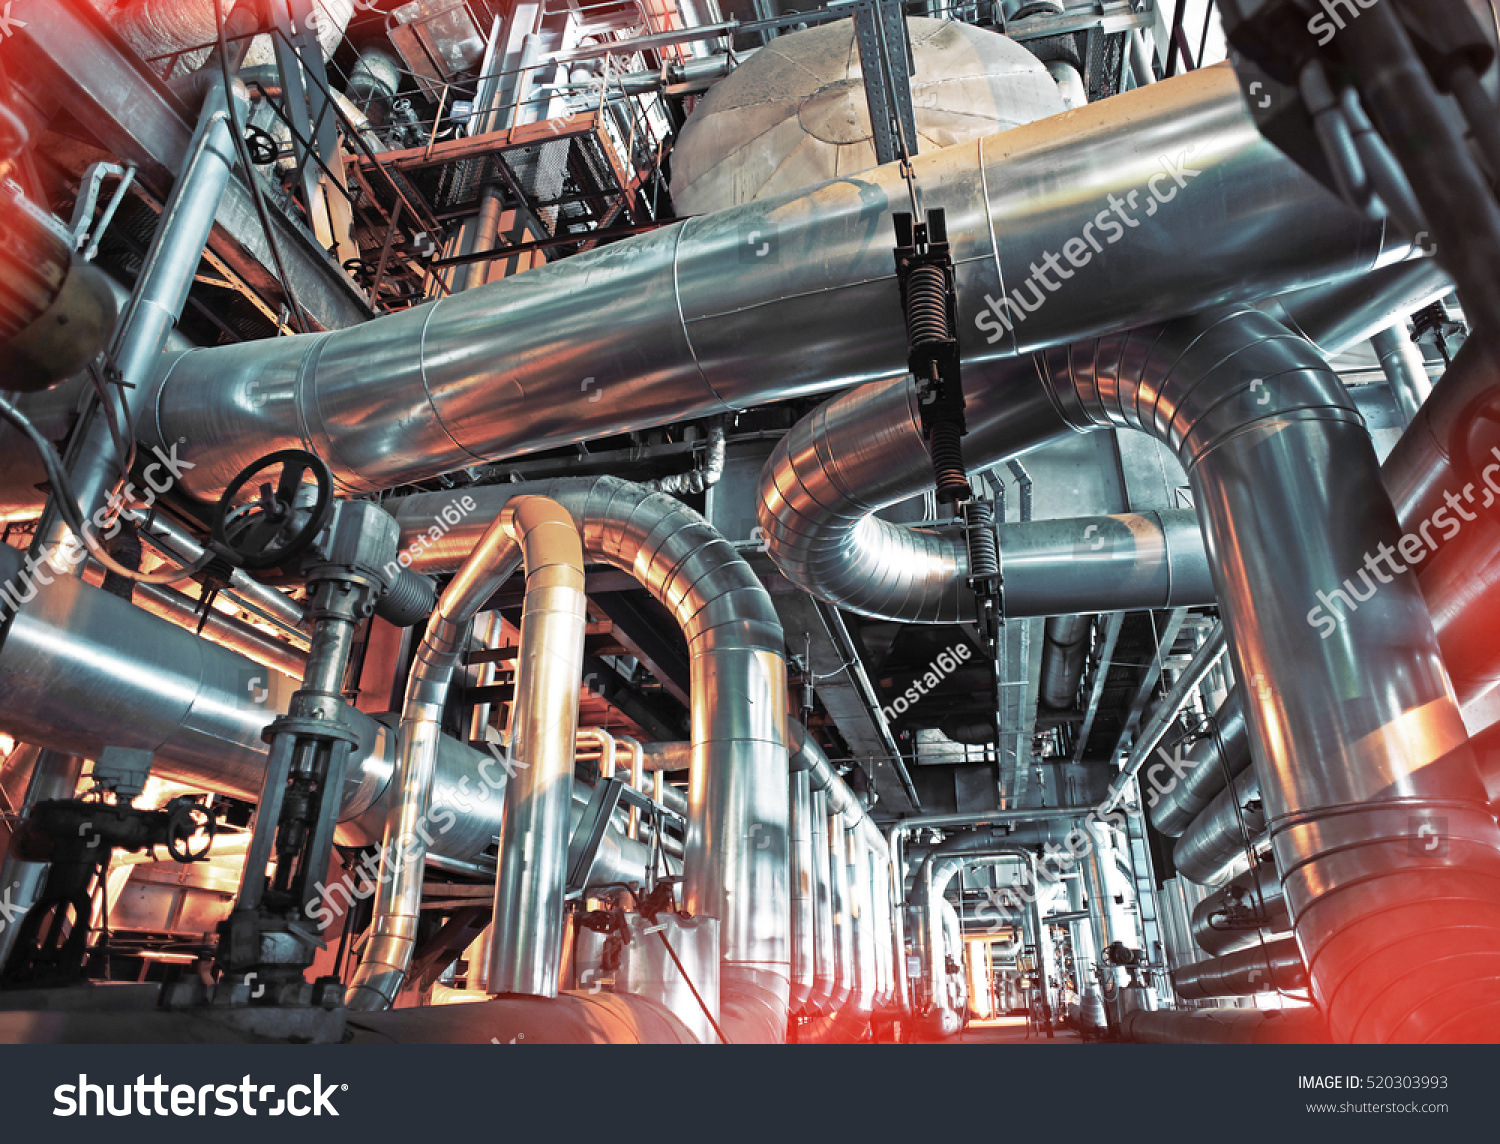 Equipment, cables and piping as found inside of a modern industrial power plant
              #520303993